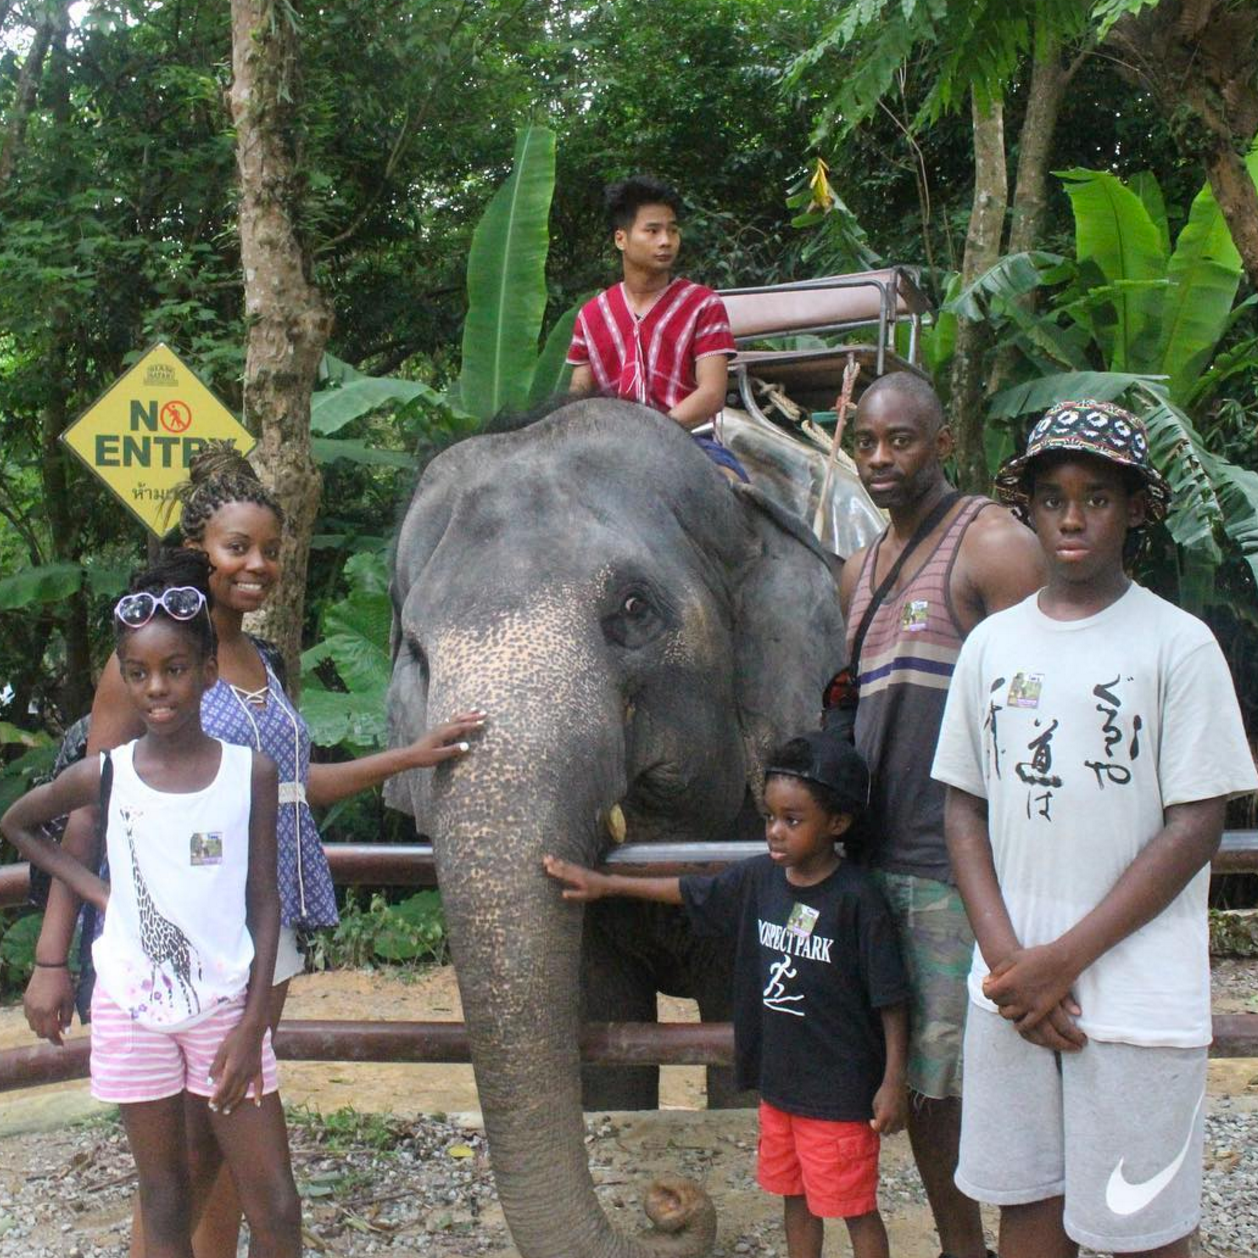 10 Super Sweet Black Family Travel Moments That Will Warm Your Heart
